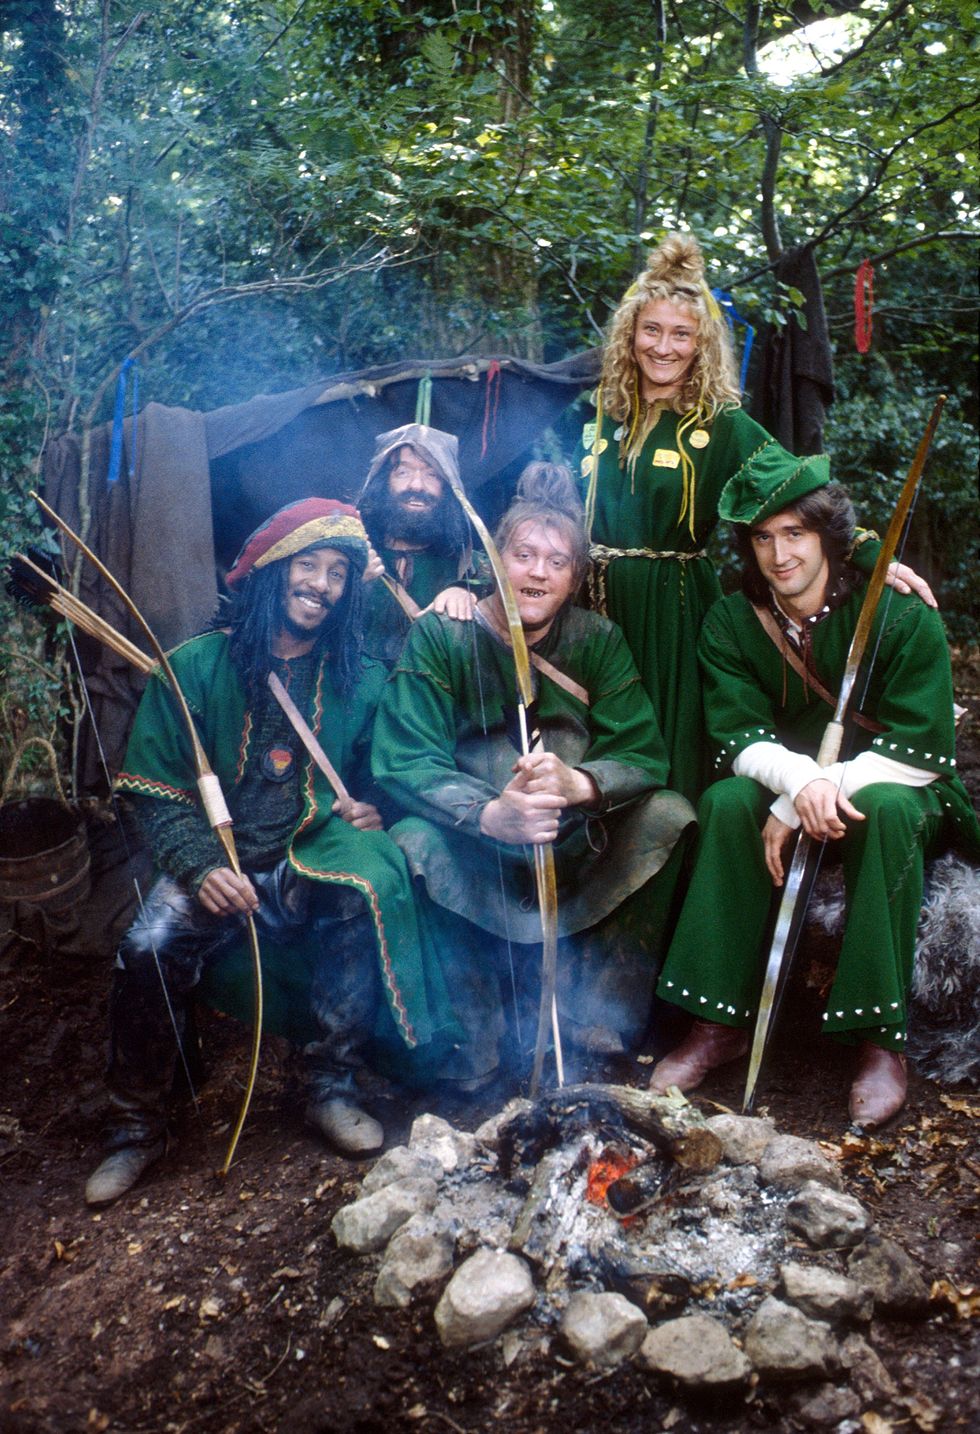 maid marian and her merry menc bbcnote to editors usage rightsfor britbox related editorial use onlyif you use reproduce this image, you must specifically mention the programme in editorial copy and not reproduce simply to promote britbox as a platform this is due to agreed usage rights by copyright ownersthis image is under copyright and can only be reproduced for editorial purposes in your print or online publication this image cannot be syndicated to any other third partybritbox press picture publicity enquiries to iwonakarbowskaitvcom